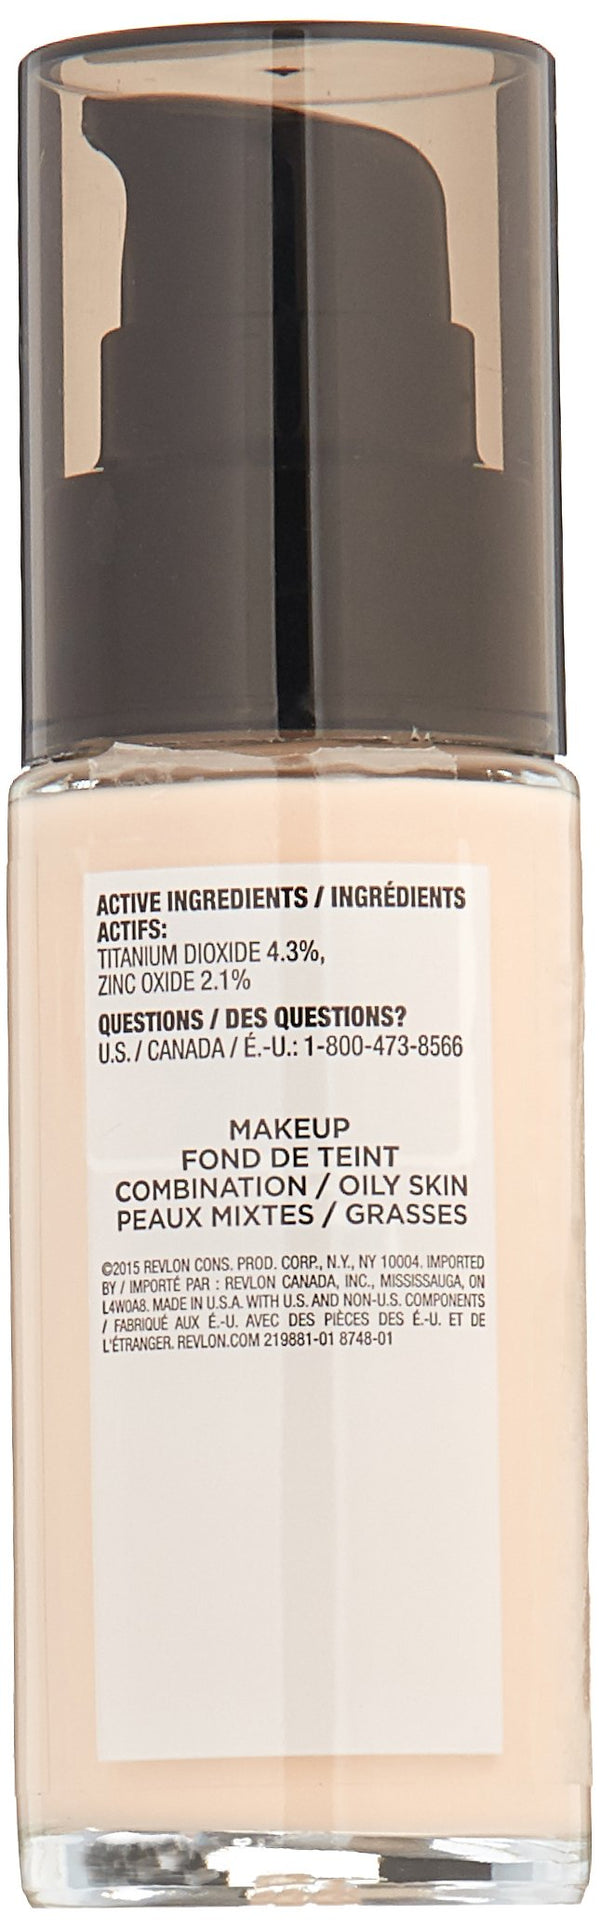 Revlon - ColorStay Makeup with SoftFlex SPF6 or SPF15, Medium/Full Coverage, Matte Finish, Combination/Oily Skin 110 Ivory, 1 Ounce